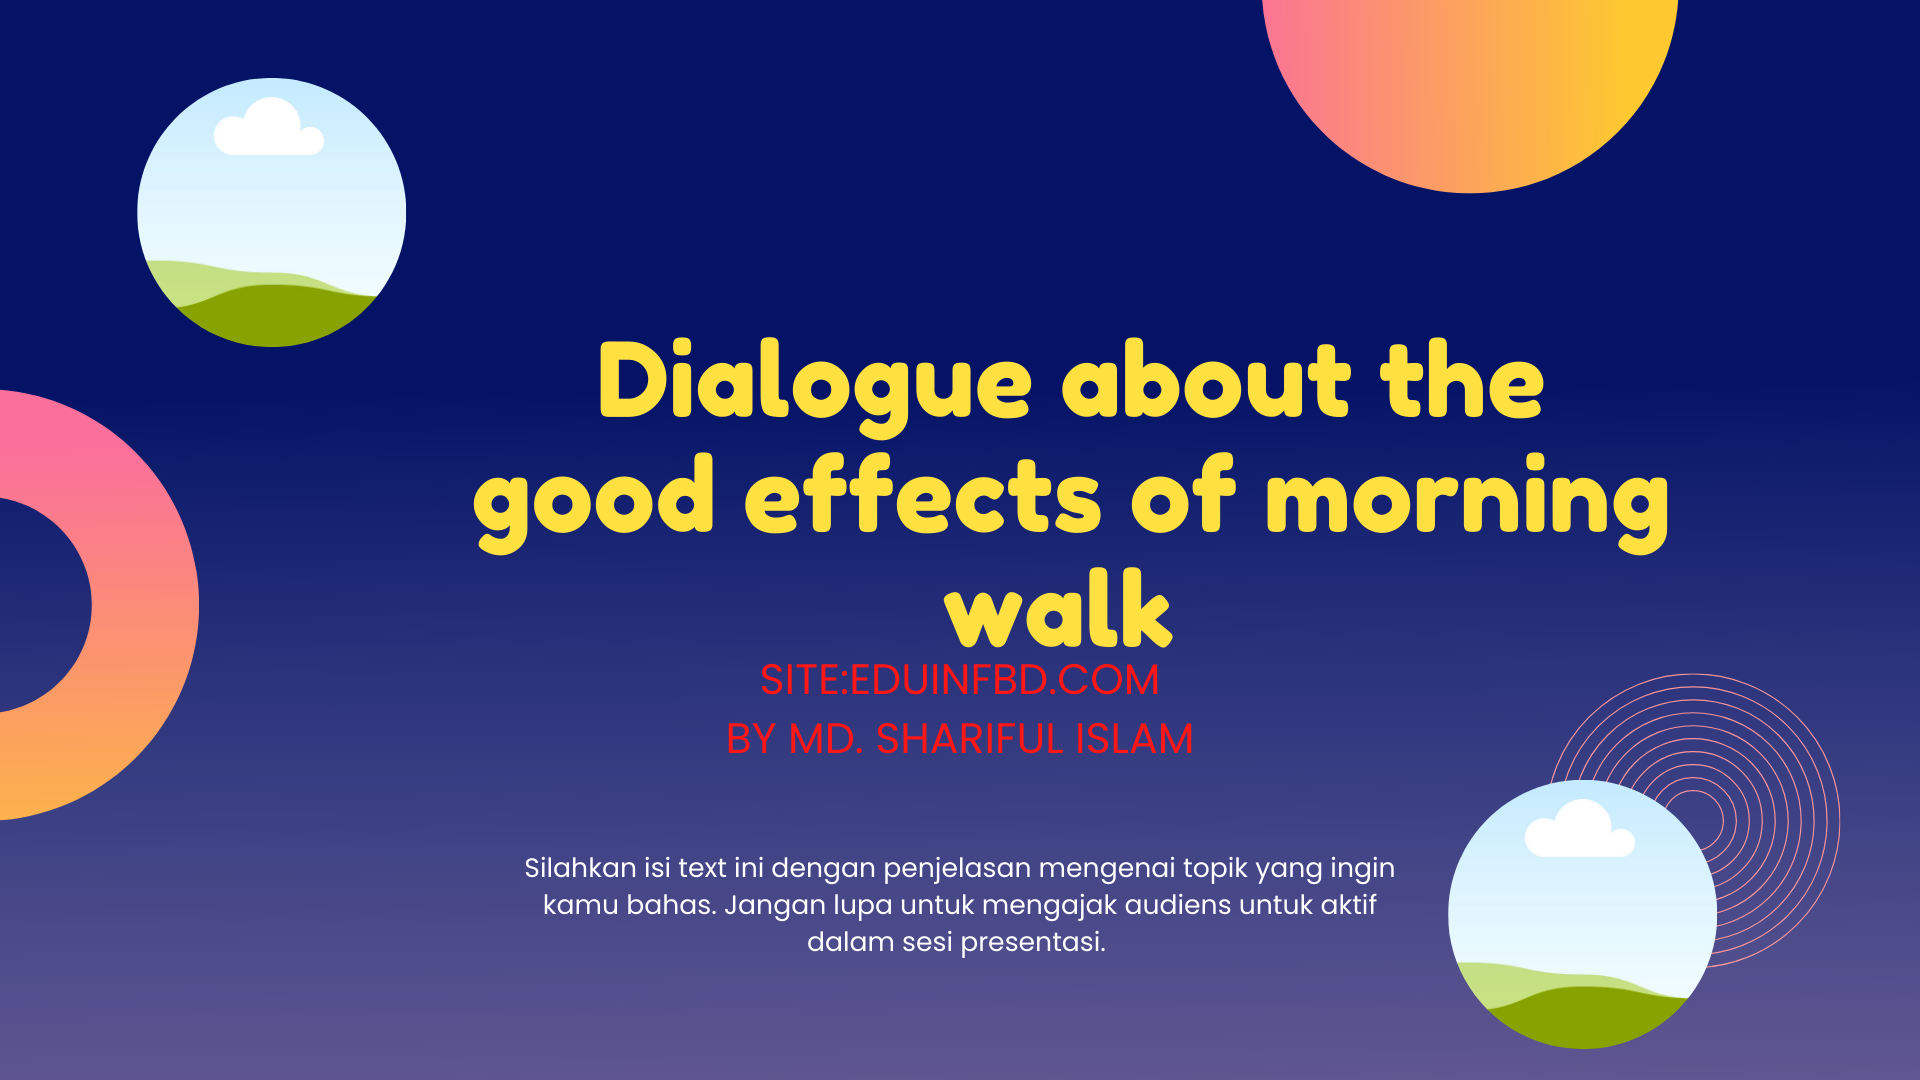 Dialogue about the good effects of morning walk